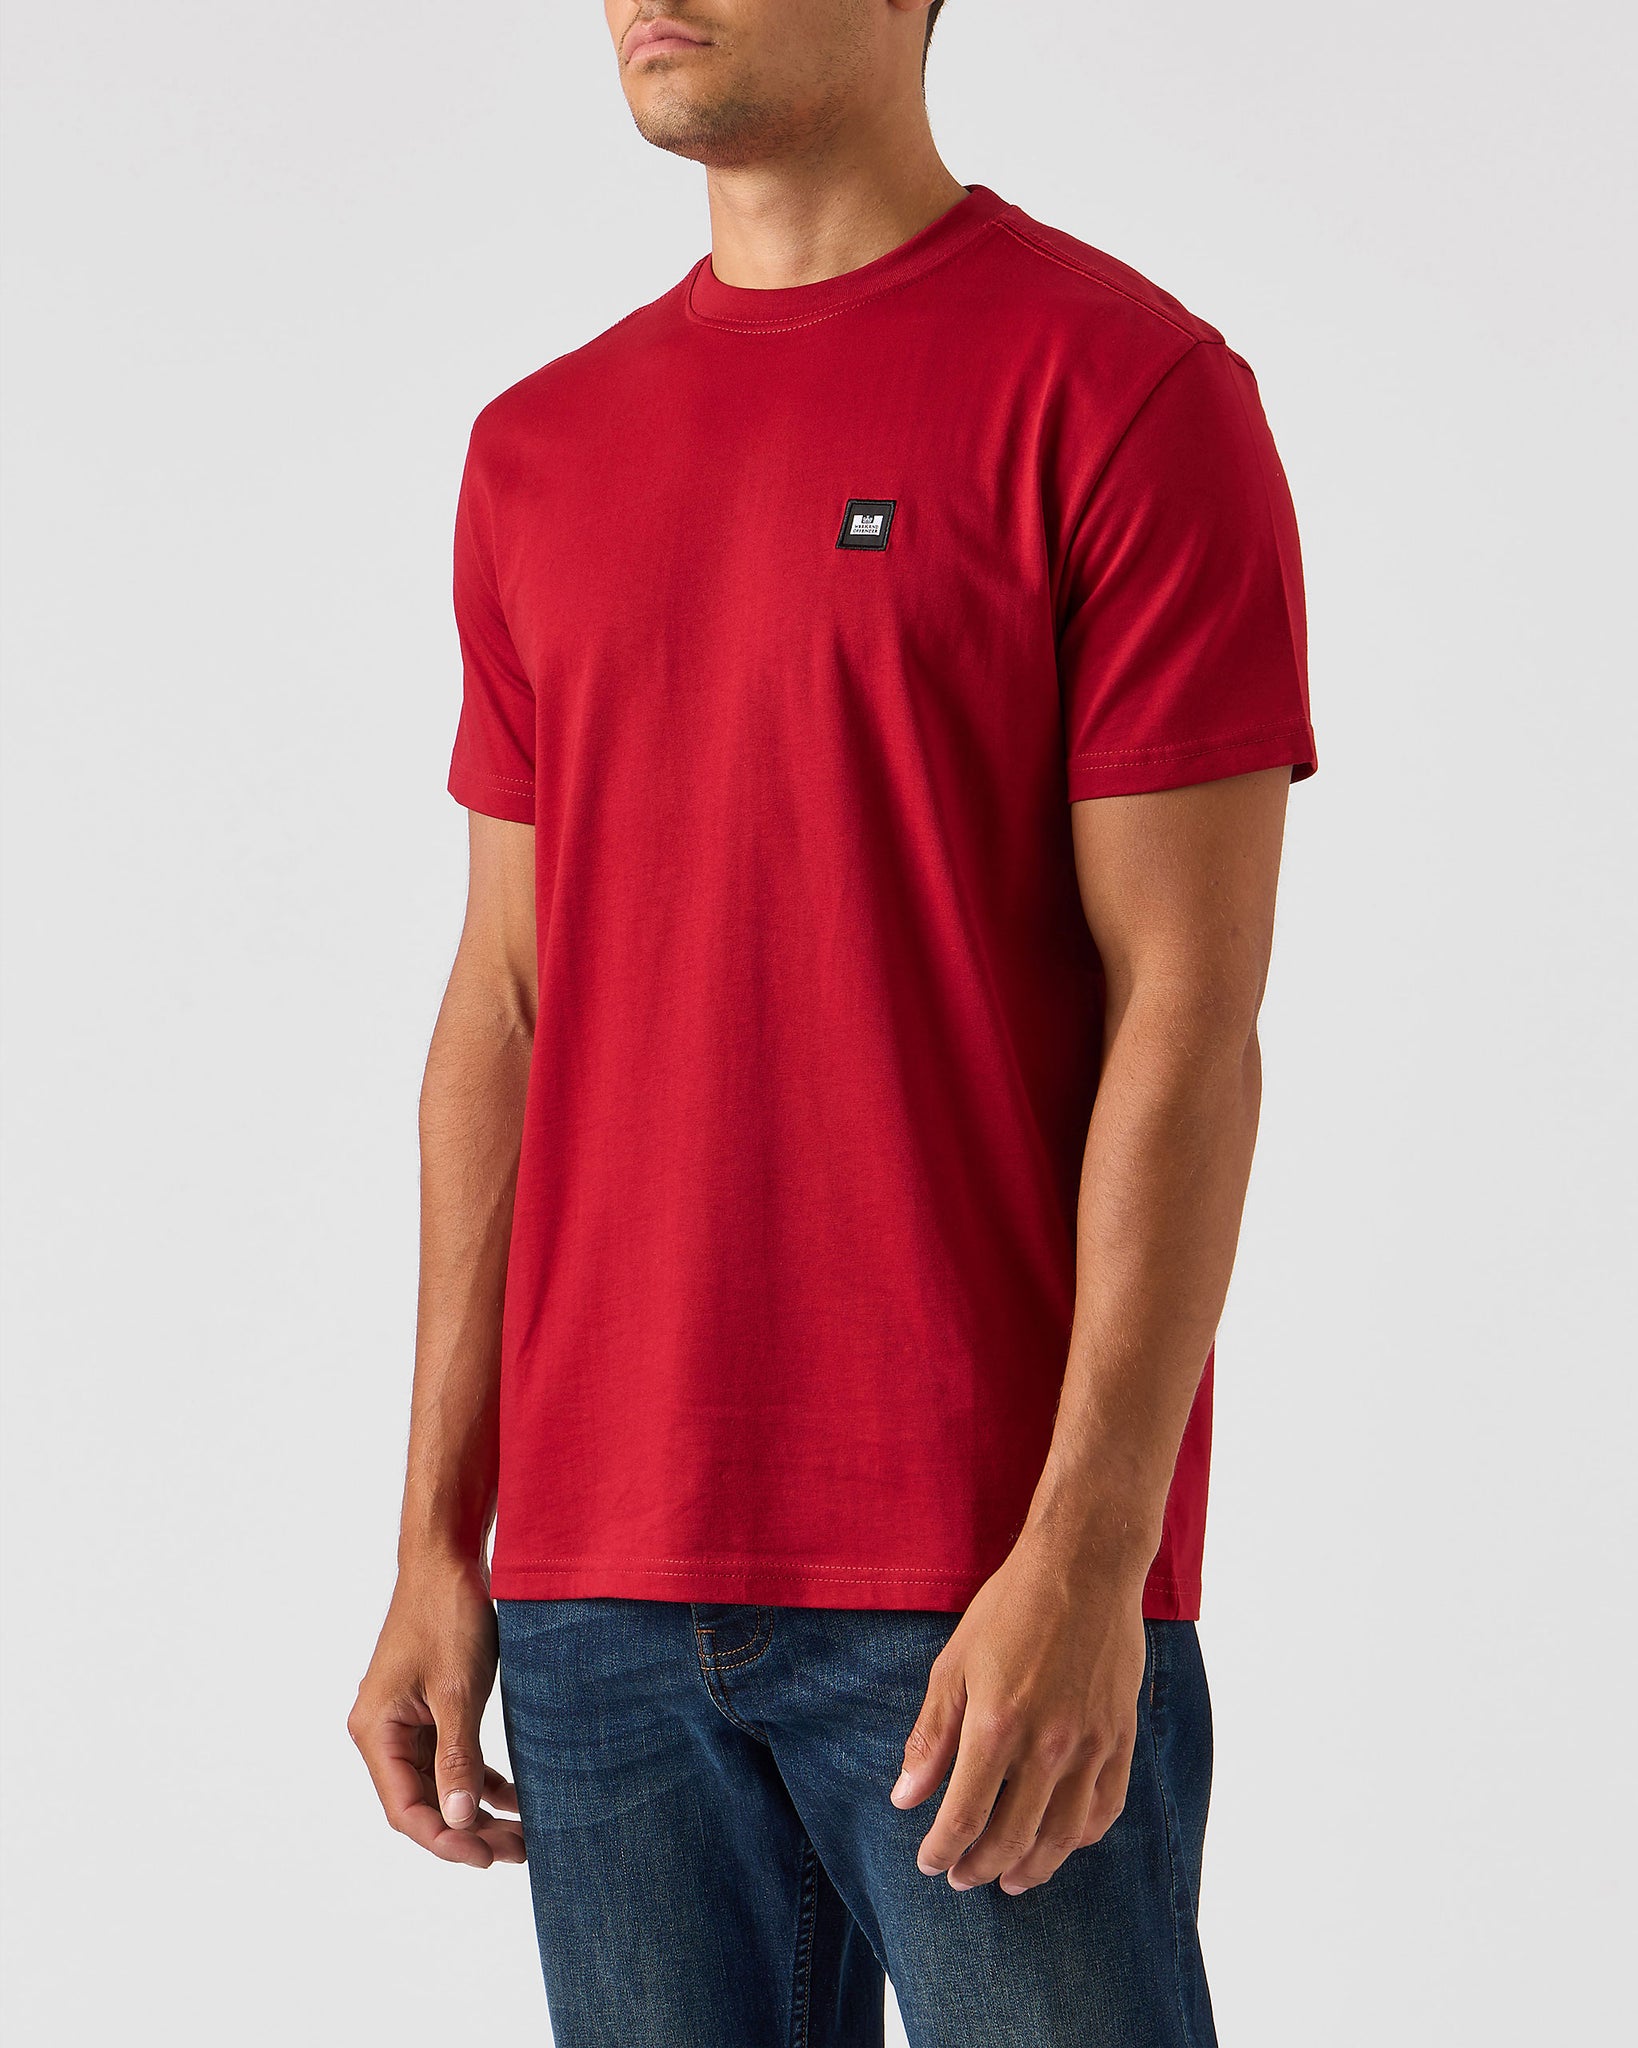 Cannon Beach T-Shirt Scarlet Red